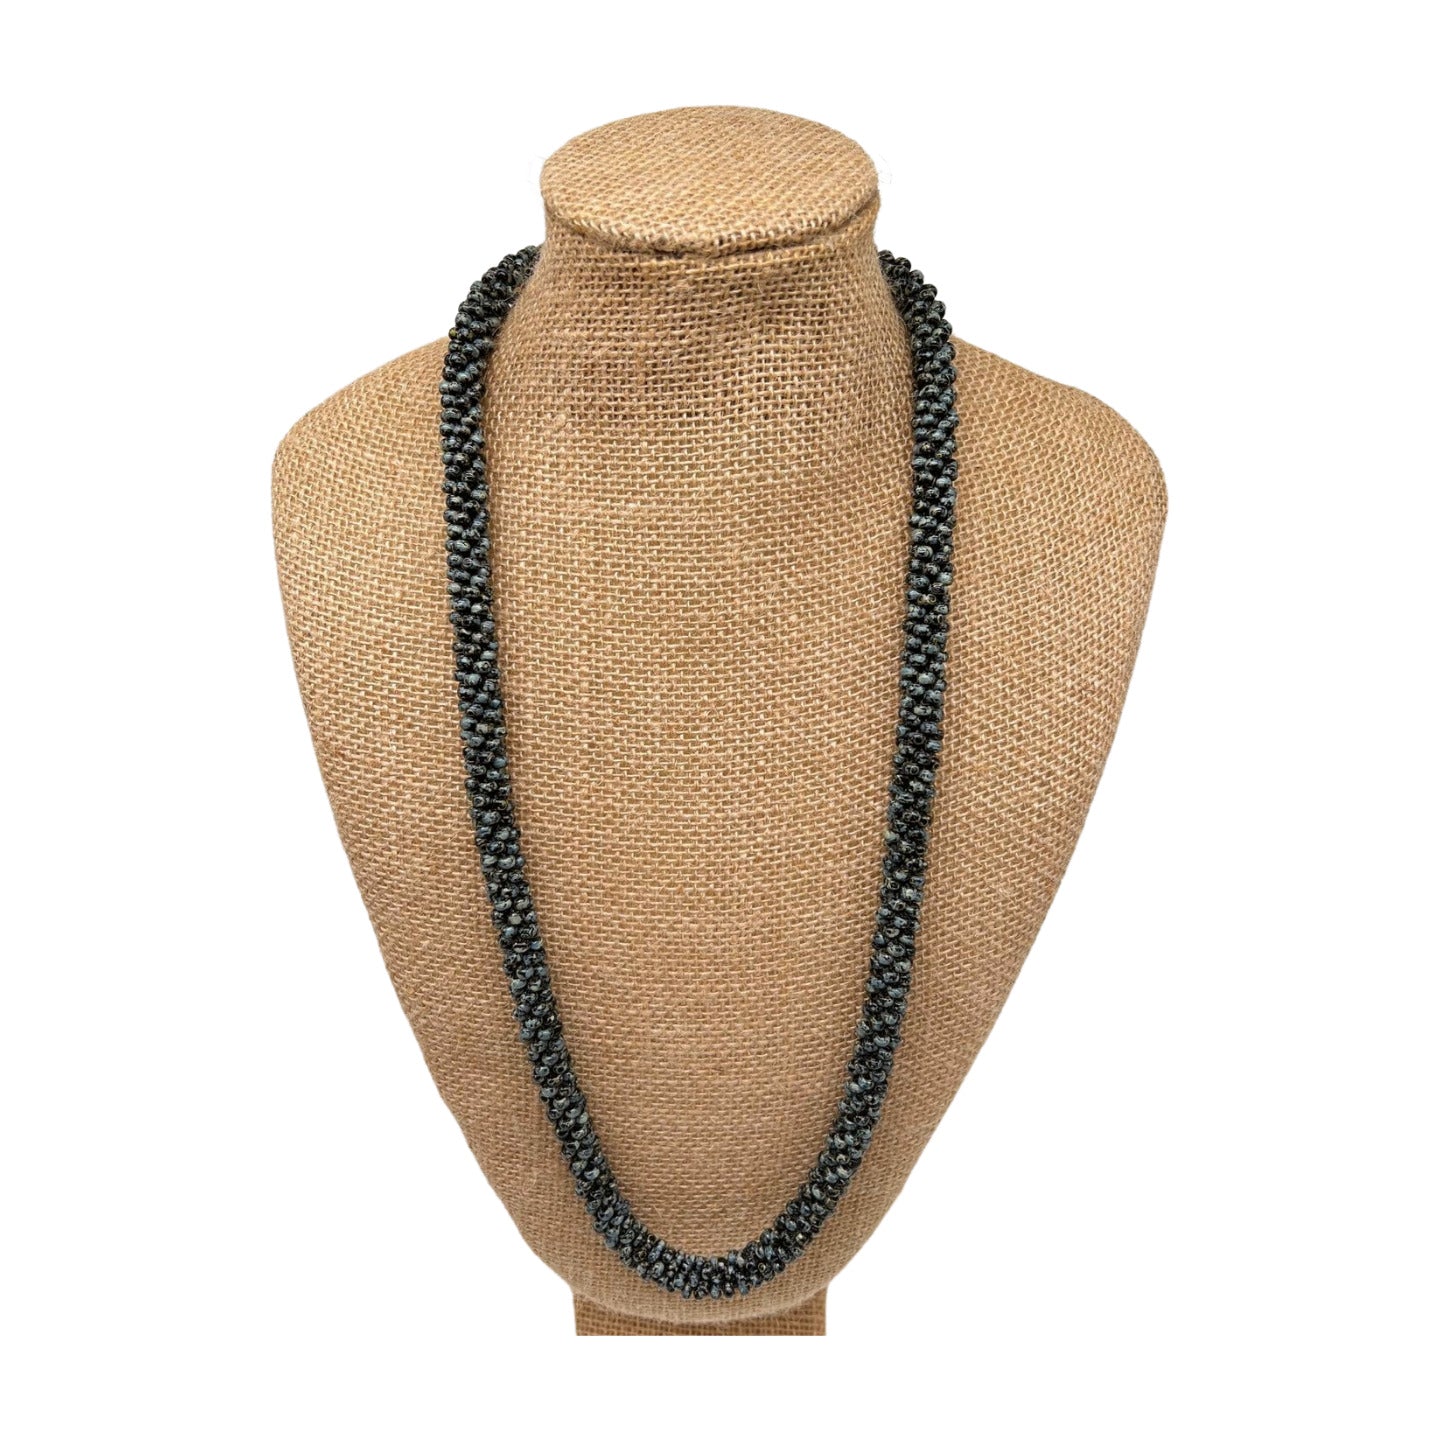 Pop-Up Mākeke - Akalei Designs - Black Picasso Round Glass Beads Necklace Lei - 31in - Front View